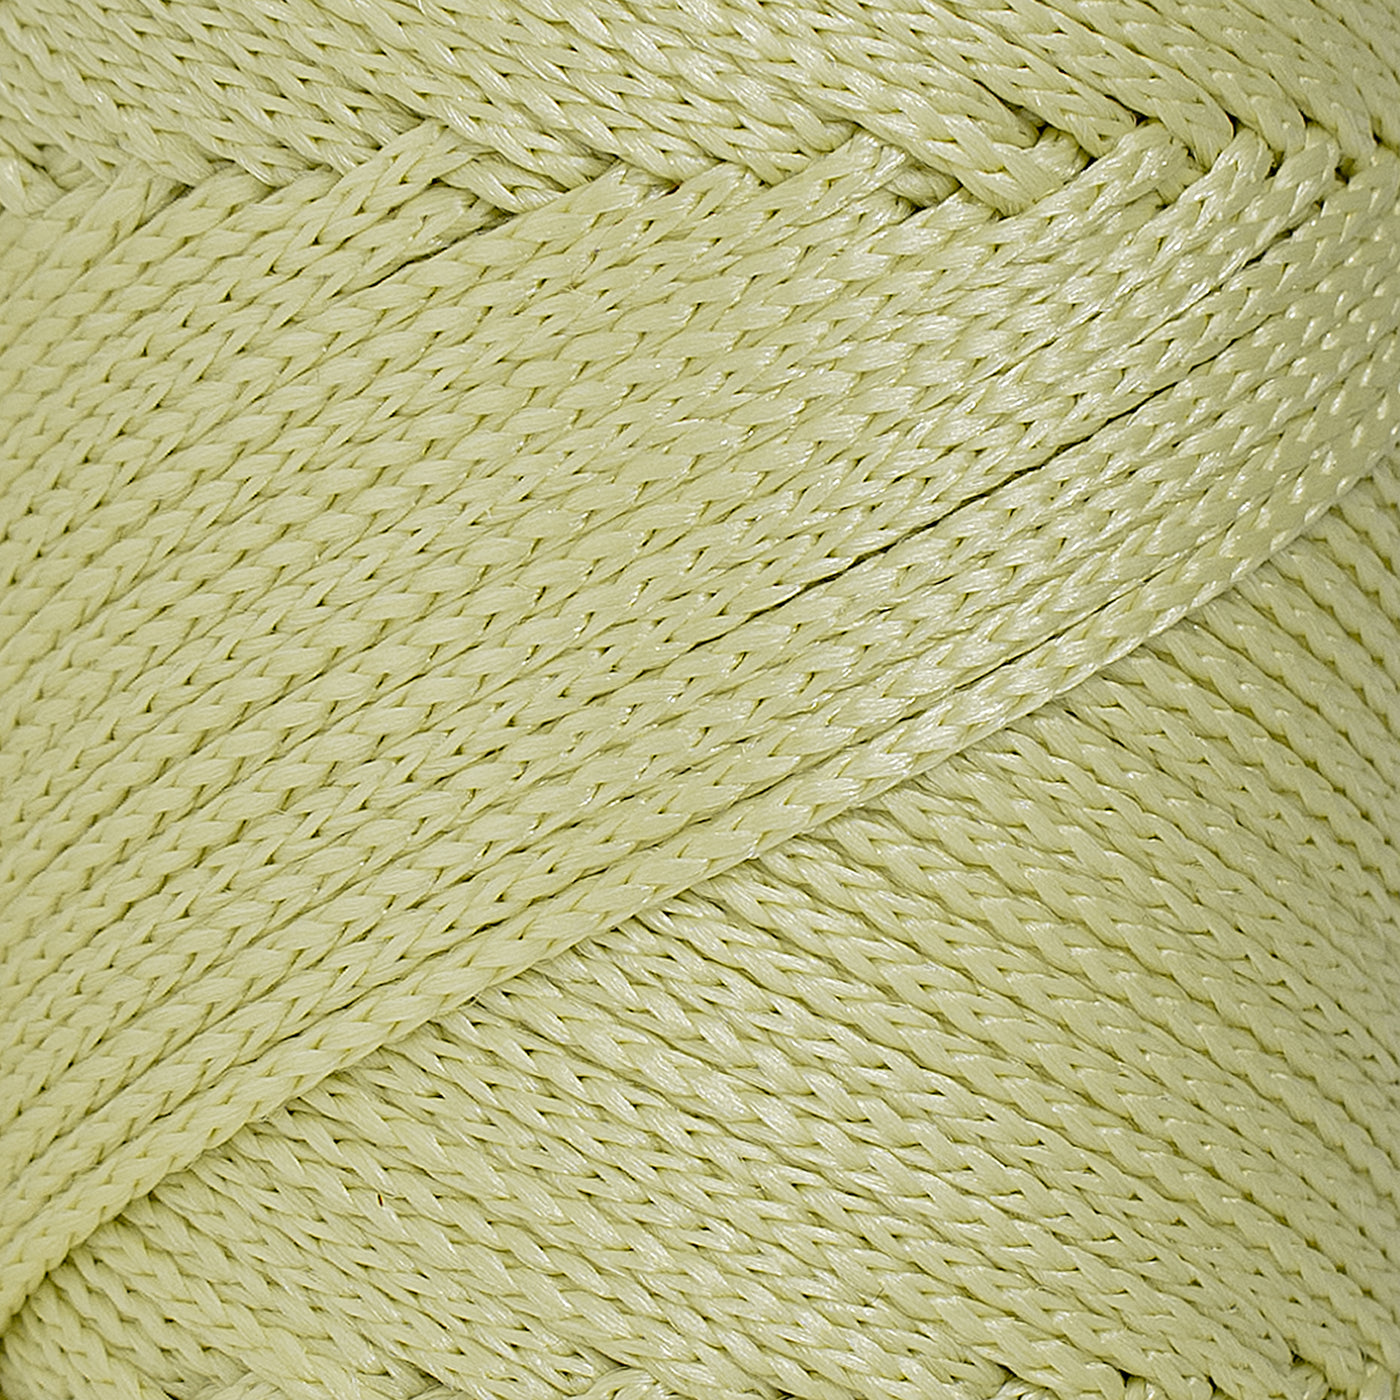 Outdoor 3 mm Macrame Braided Cord – Ice Lemon Color